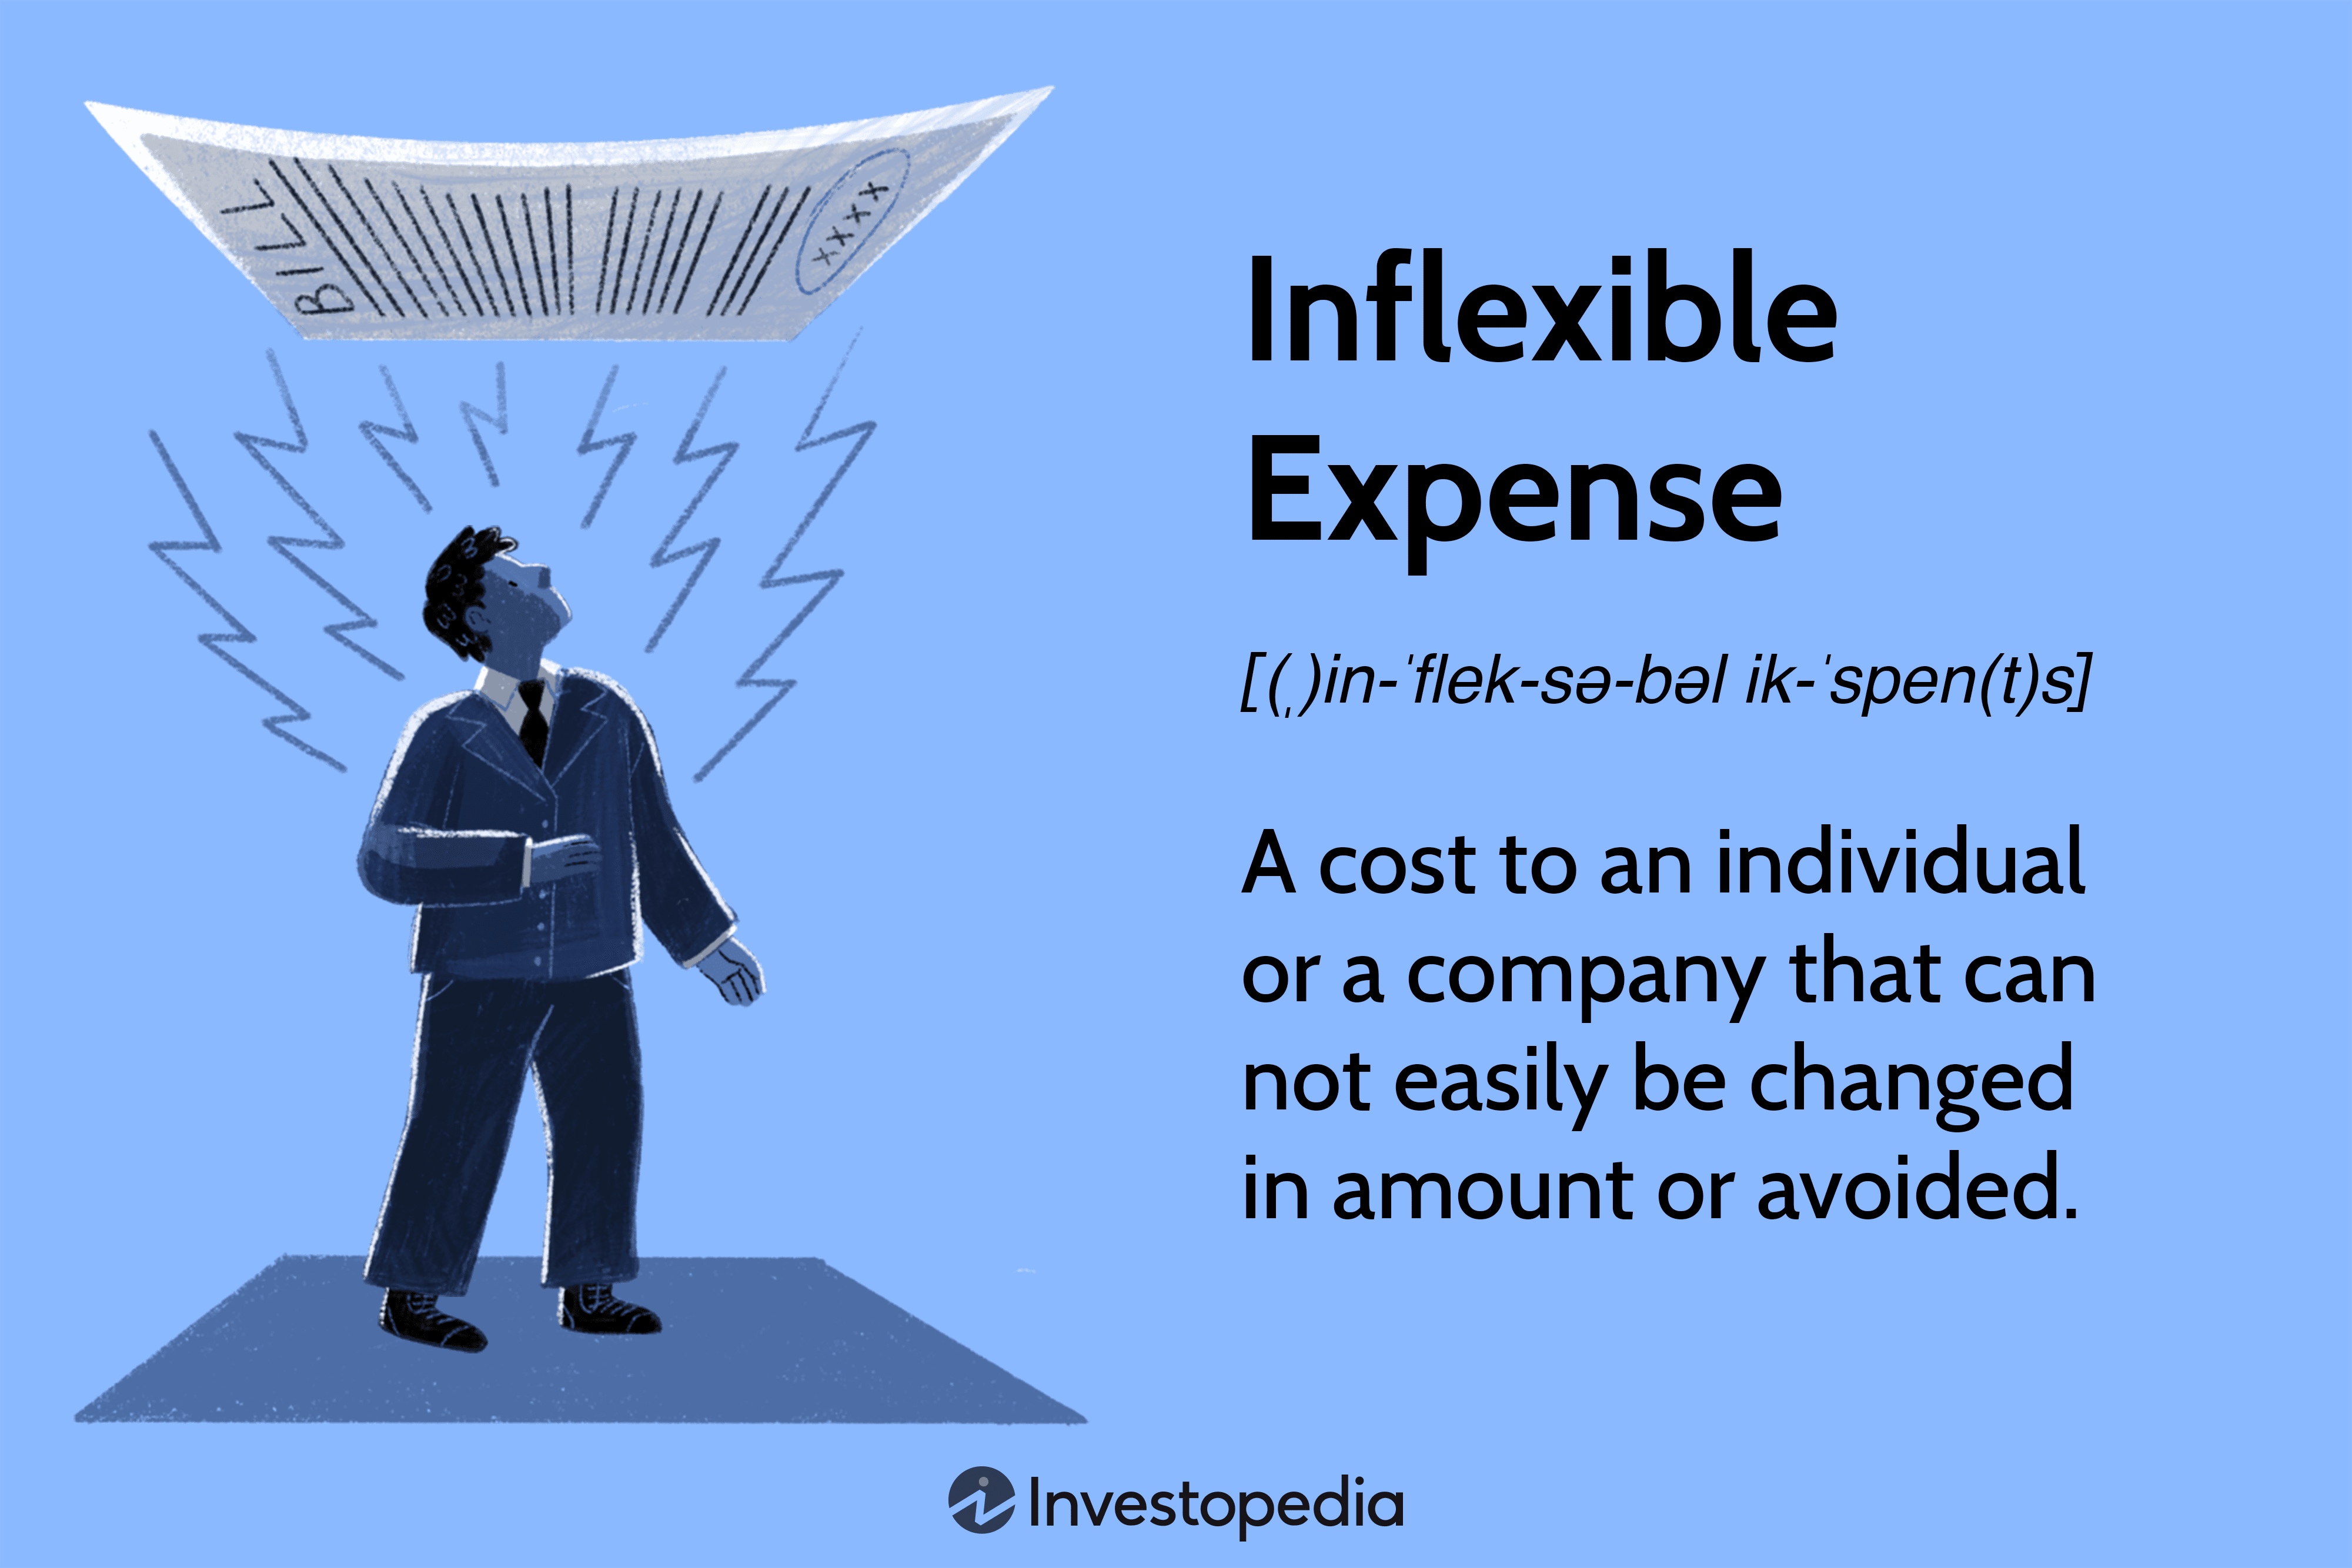 Inflexible Expense